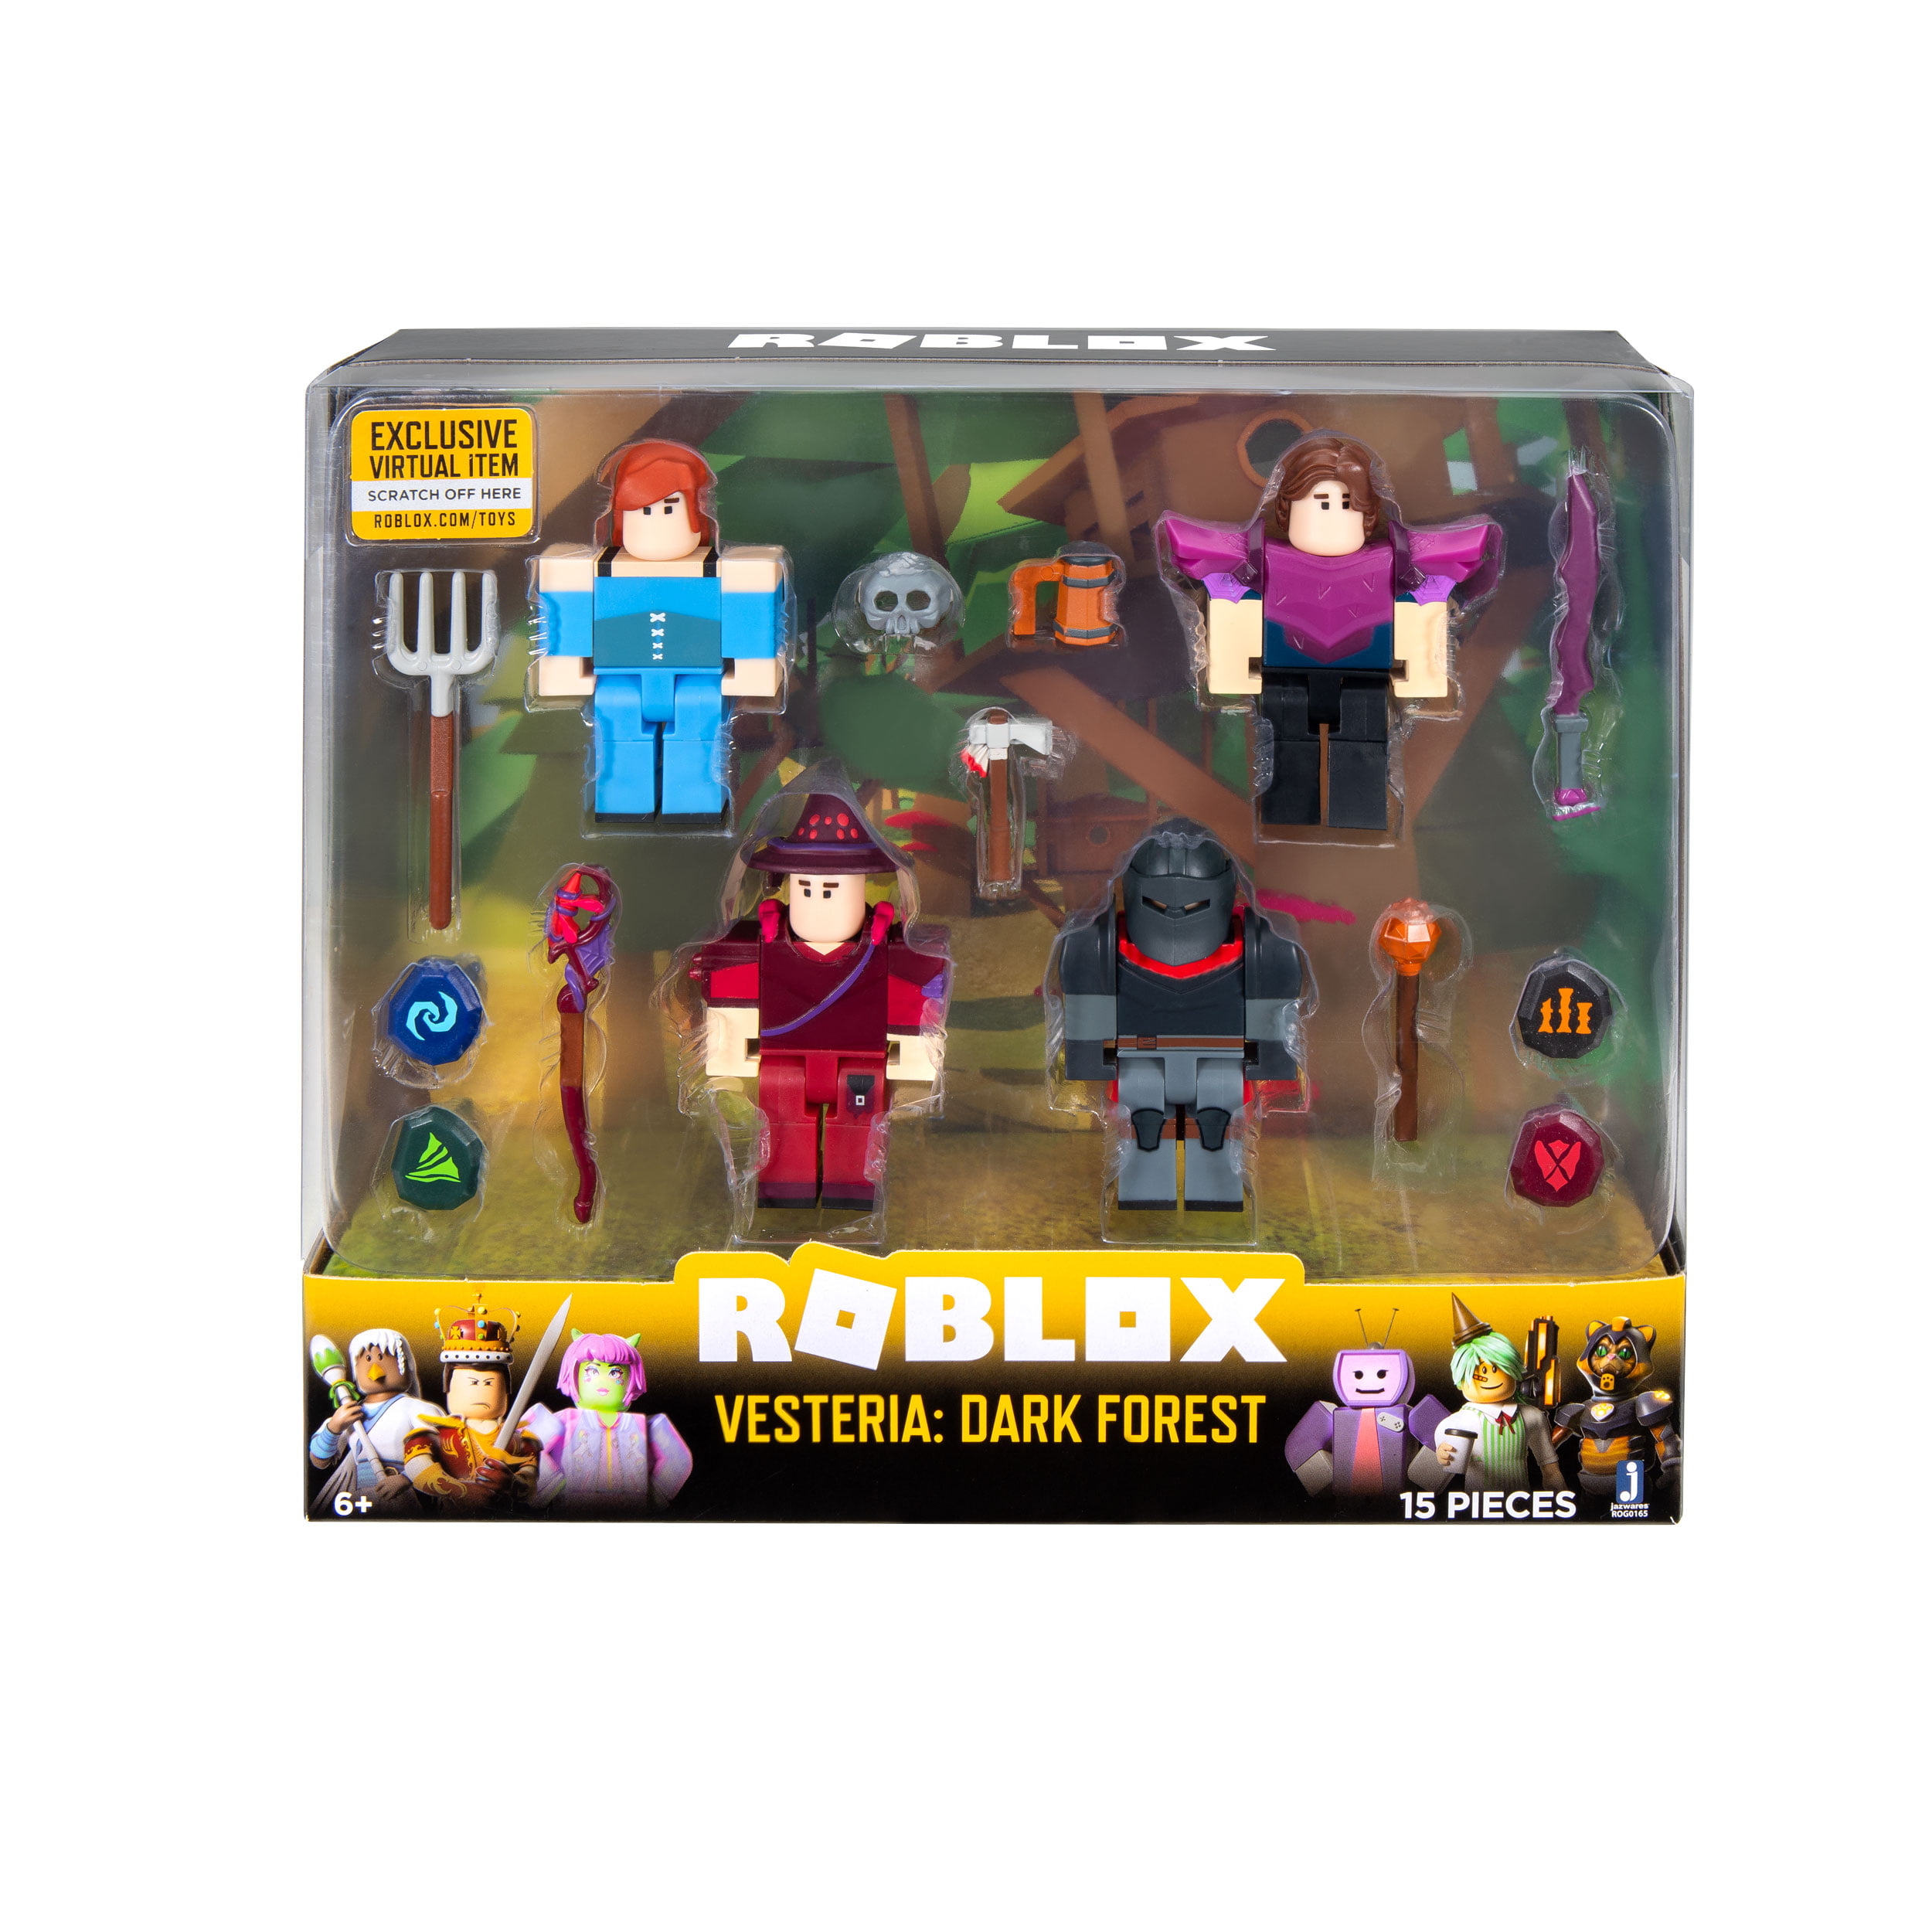 Roblox Celebrity Collection Vesteria Dark Forest Four Figure Pack Includes Exclusive Virtual Item Walmart Com Walmart Com - roblox vesteria how to get lantern